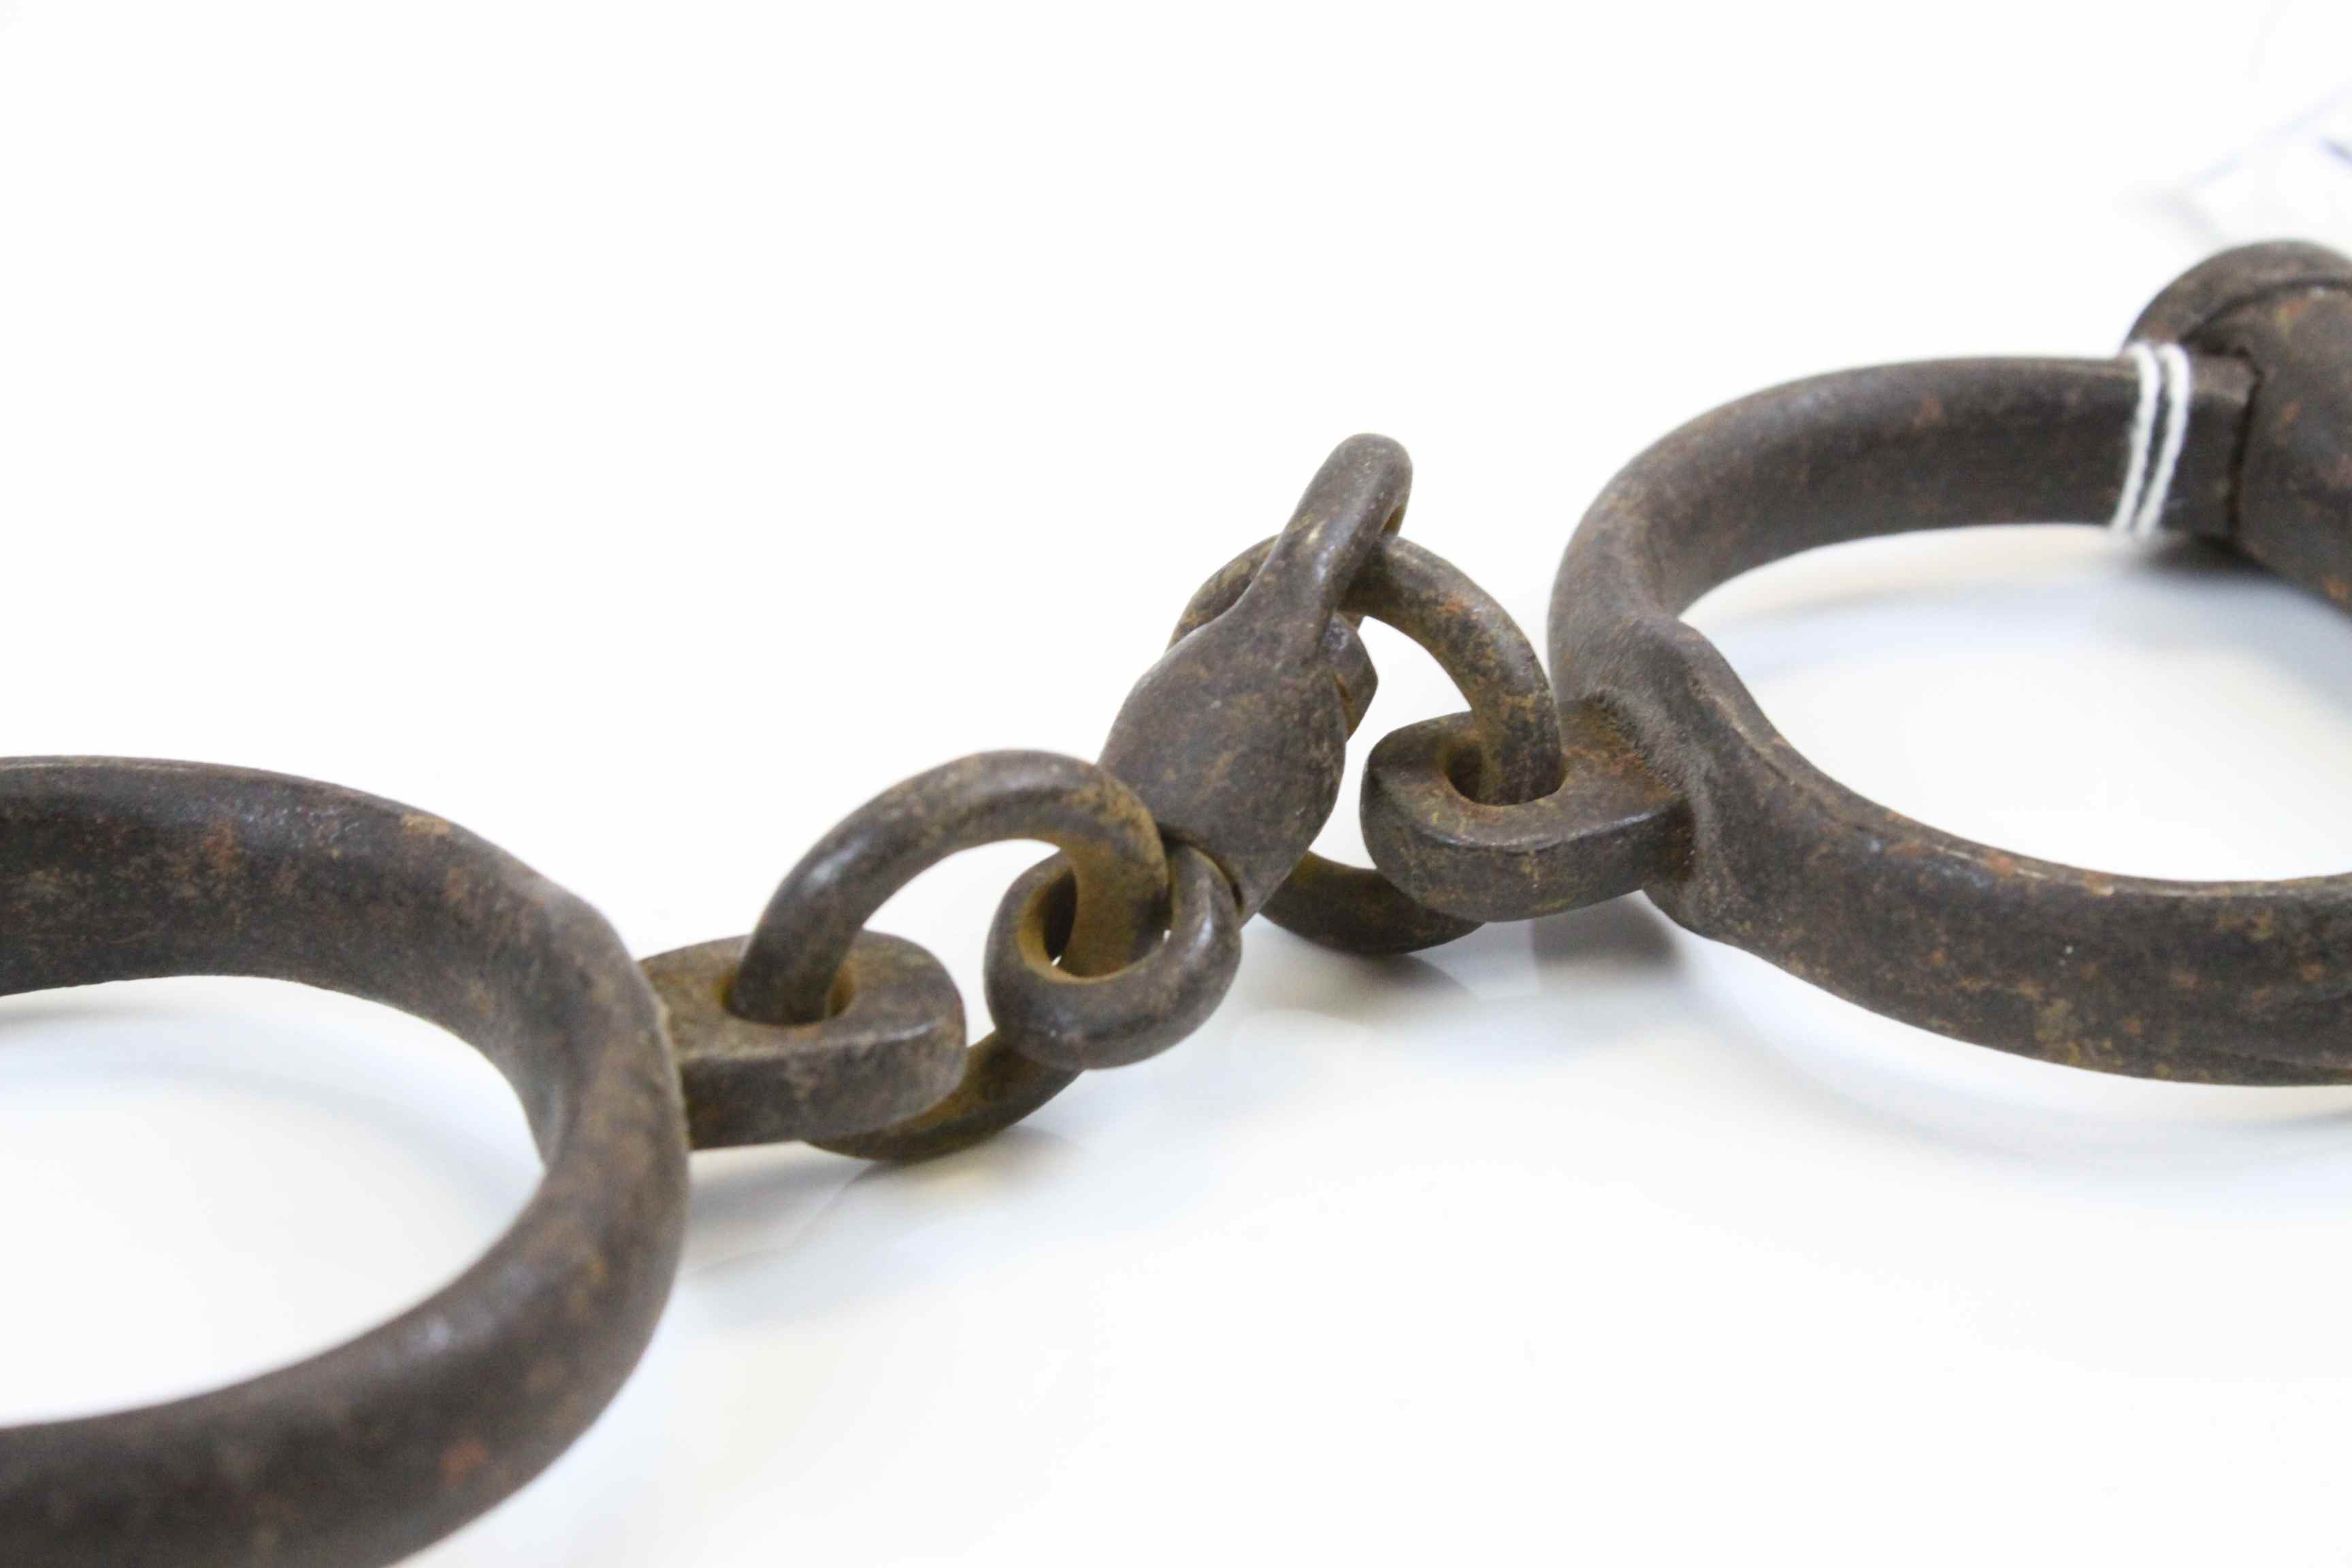 Vintage pair of cast Iron Police type Handcuffs by "Hiatt" - Image 3 of 4